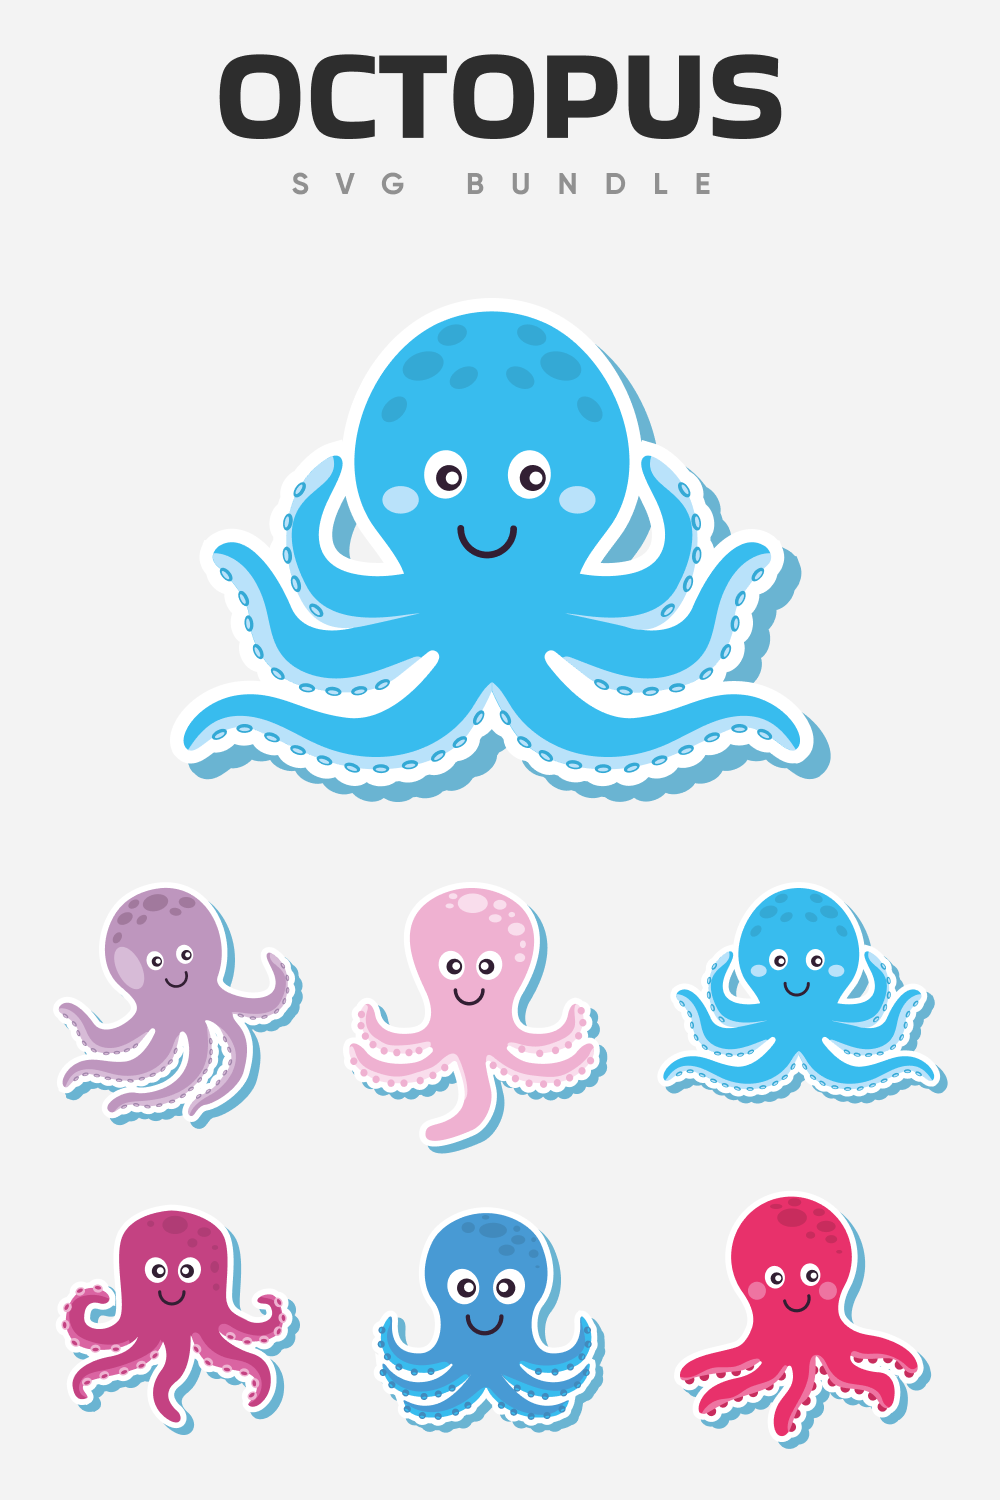 Beautiful octopus images for your personalization.